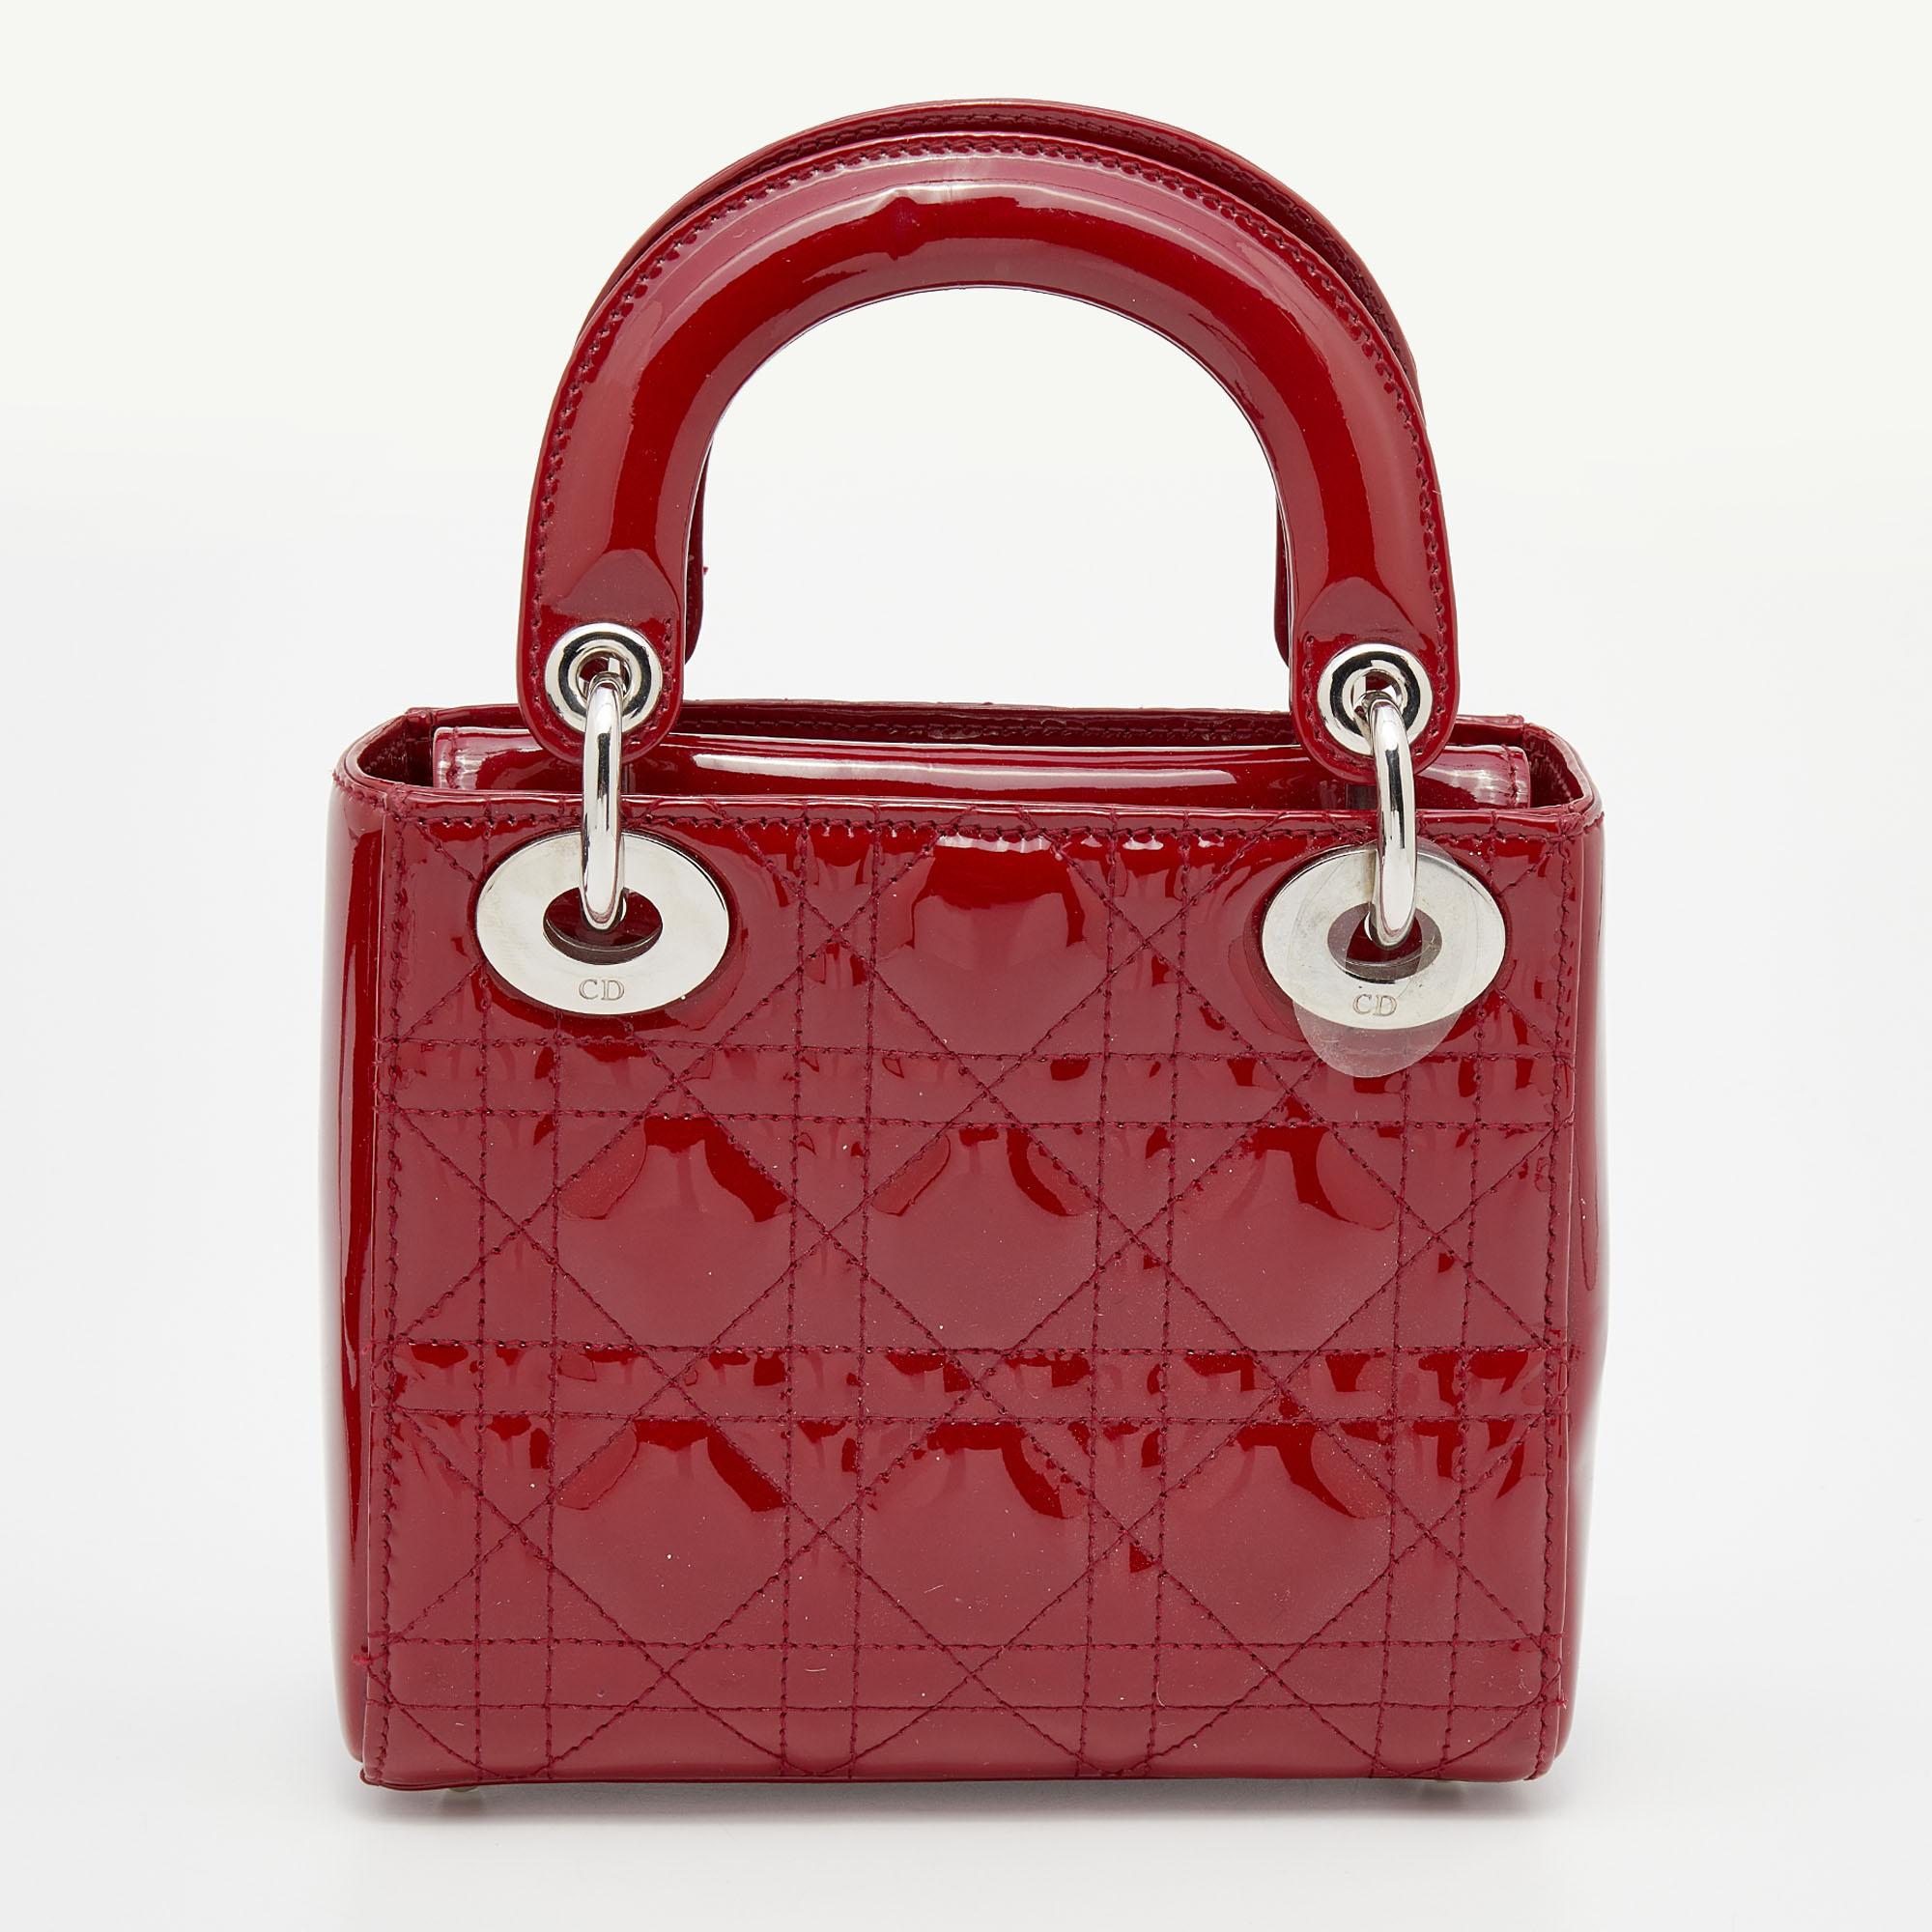 A timeless status and significant design define this impeccable mini Lady Dior tote. An iconic creation of the House, the tote brings eternal poise and elegance to your appearance. It comes crafted in red Cannage patent leather with logo charms